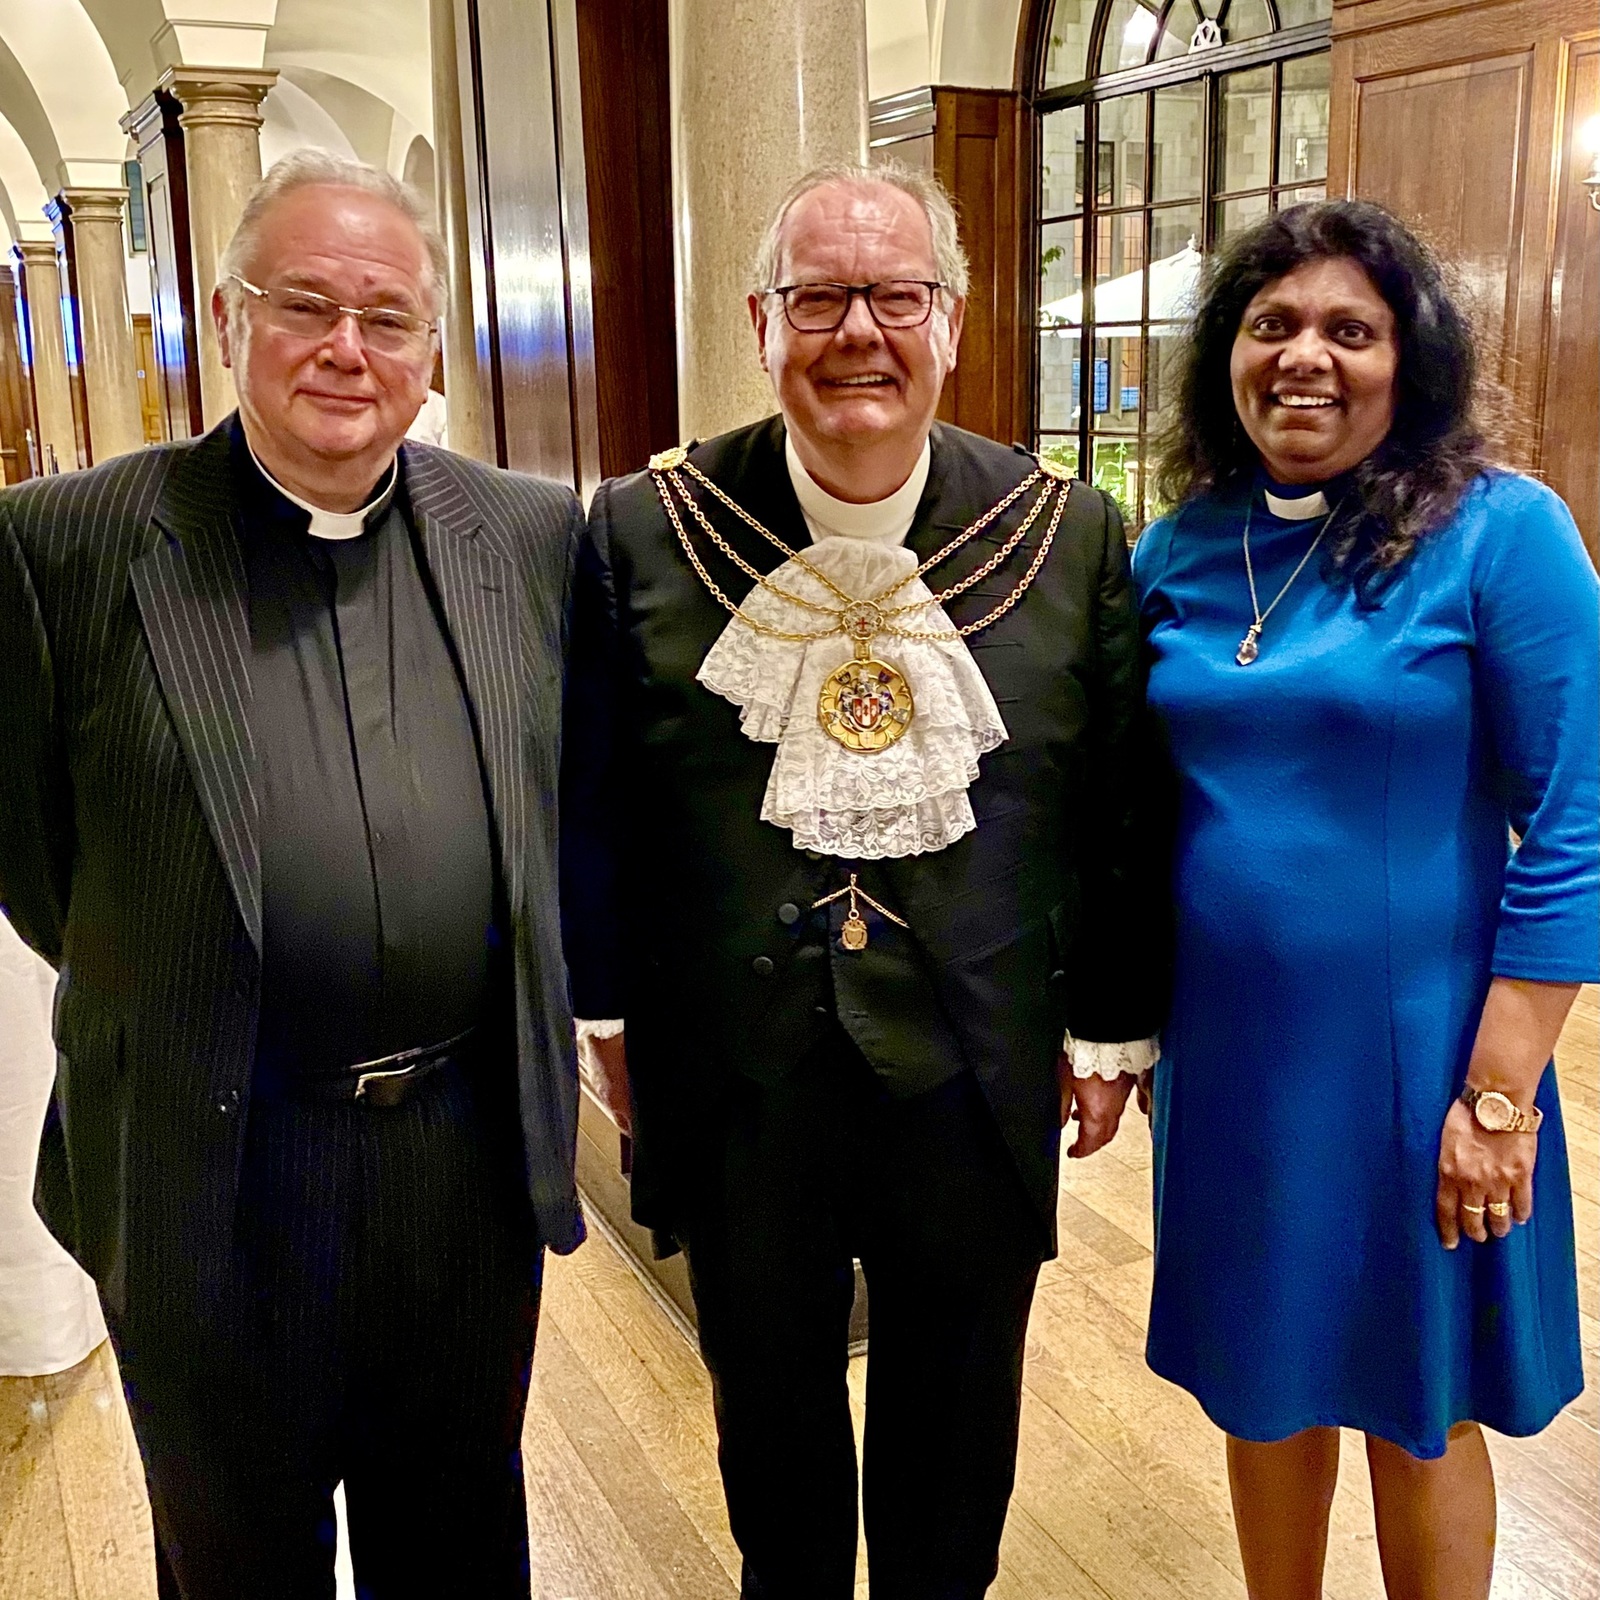 9 May 2023 - This year’s extraordinarily beautiful 368th Clergy Support Trust Festival (formerly Sons & Friends of the Clergy) was held at St Paul's.